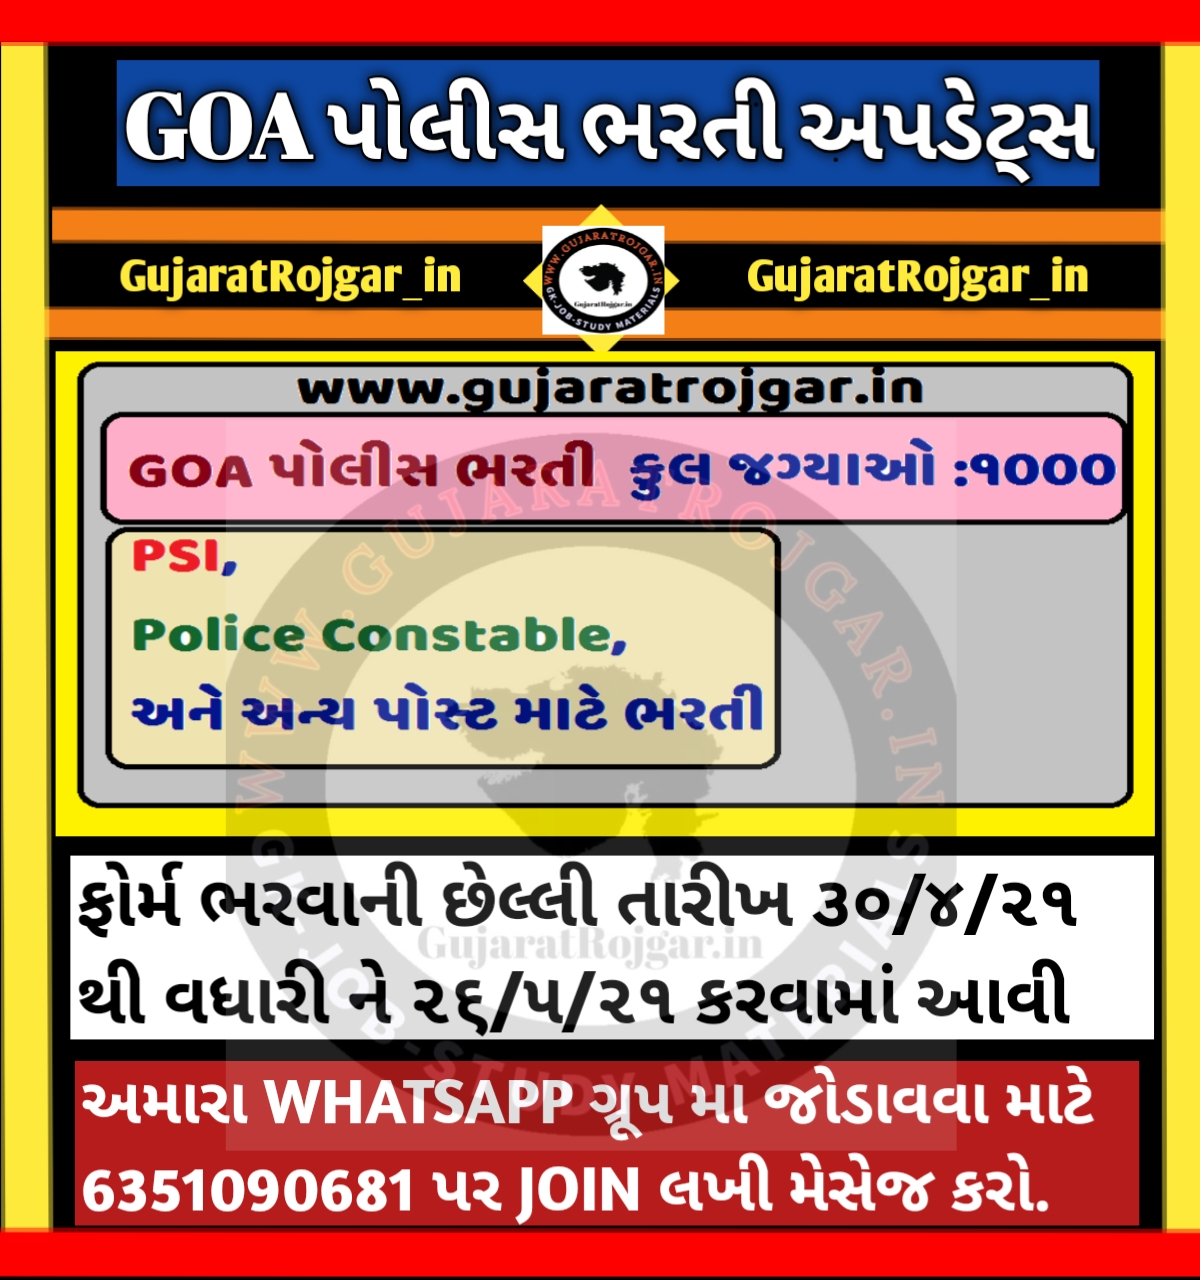 Goa Police Recruitment For For SI,ASI,LDC,Steno And Other 1000 Post